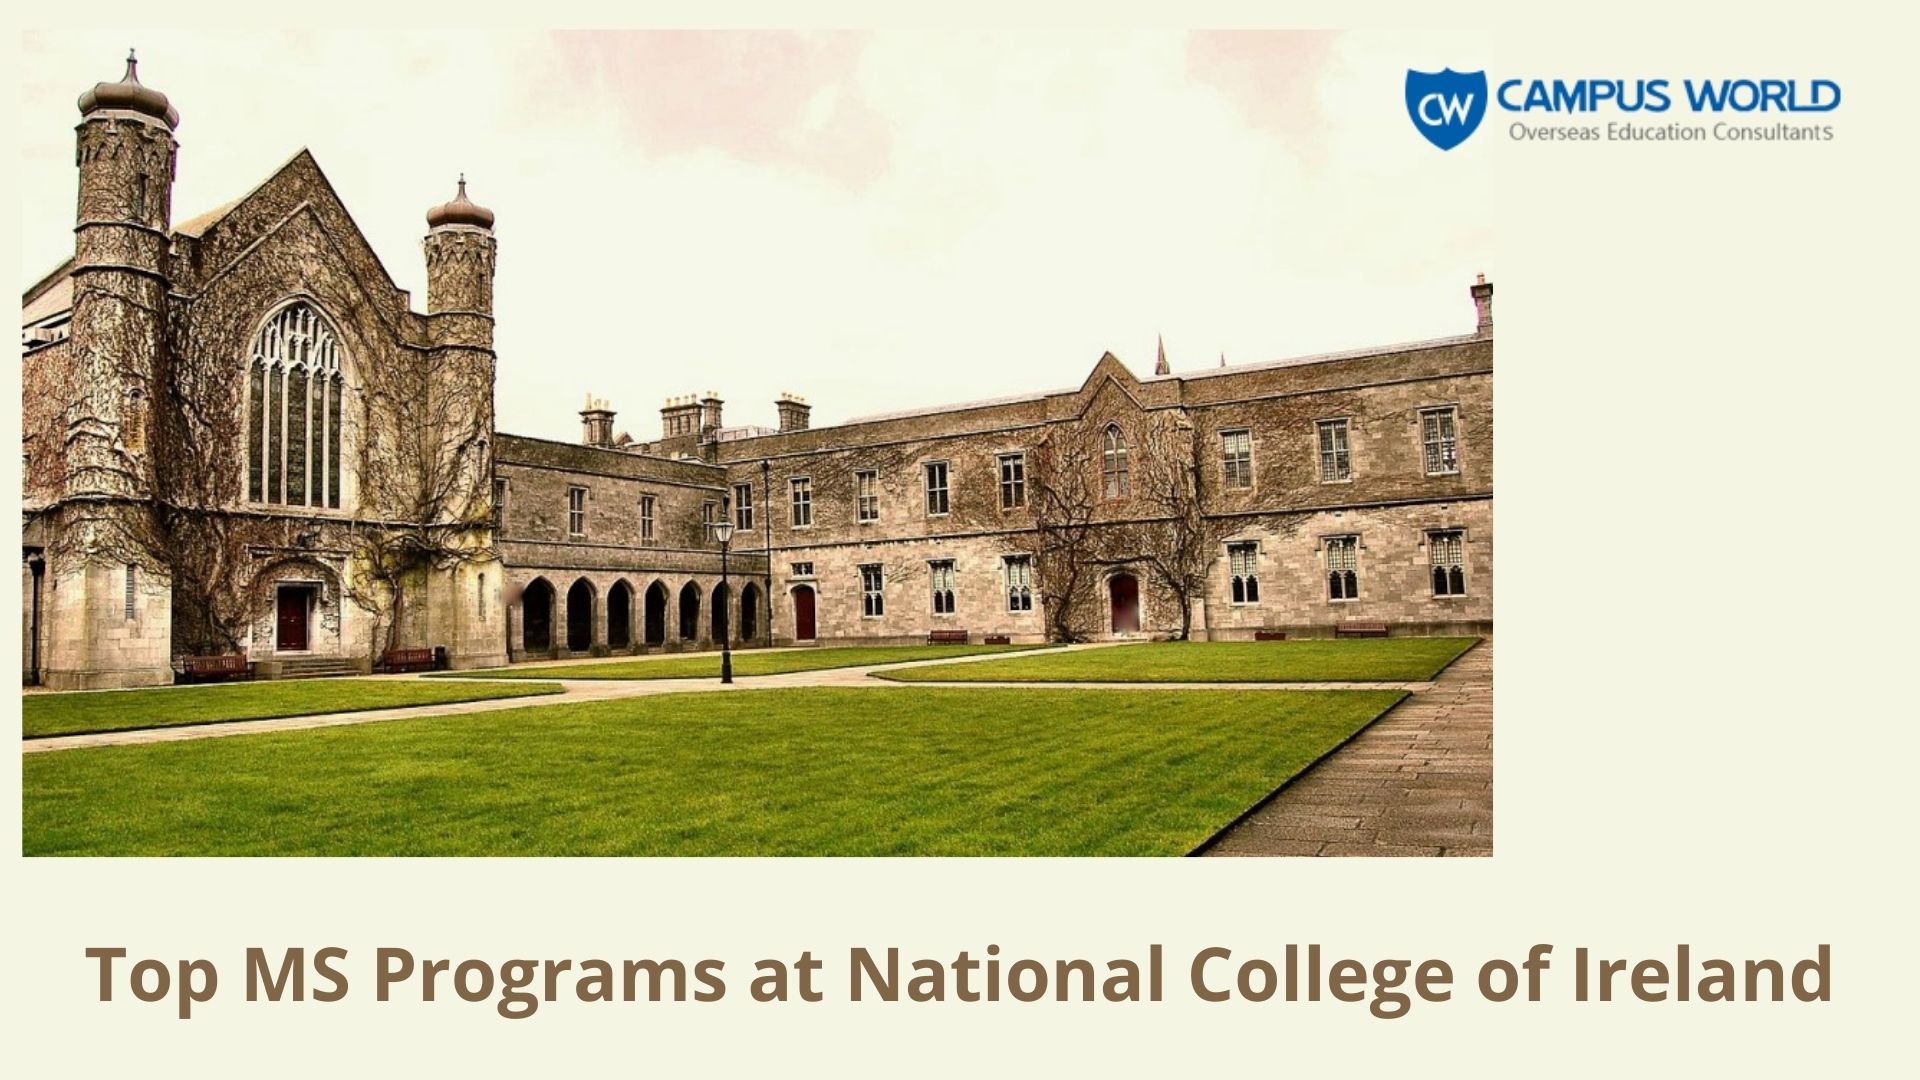 Top MS Programs at National College of Ireland